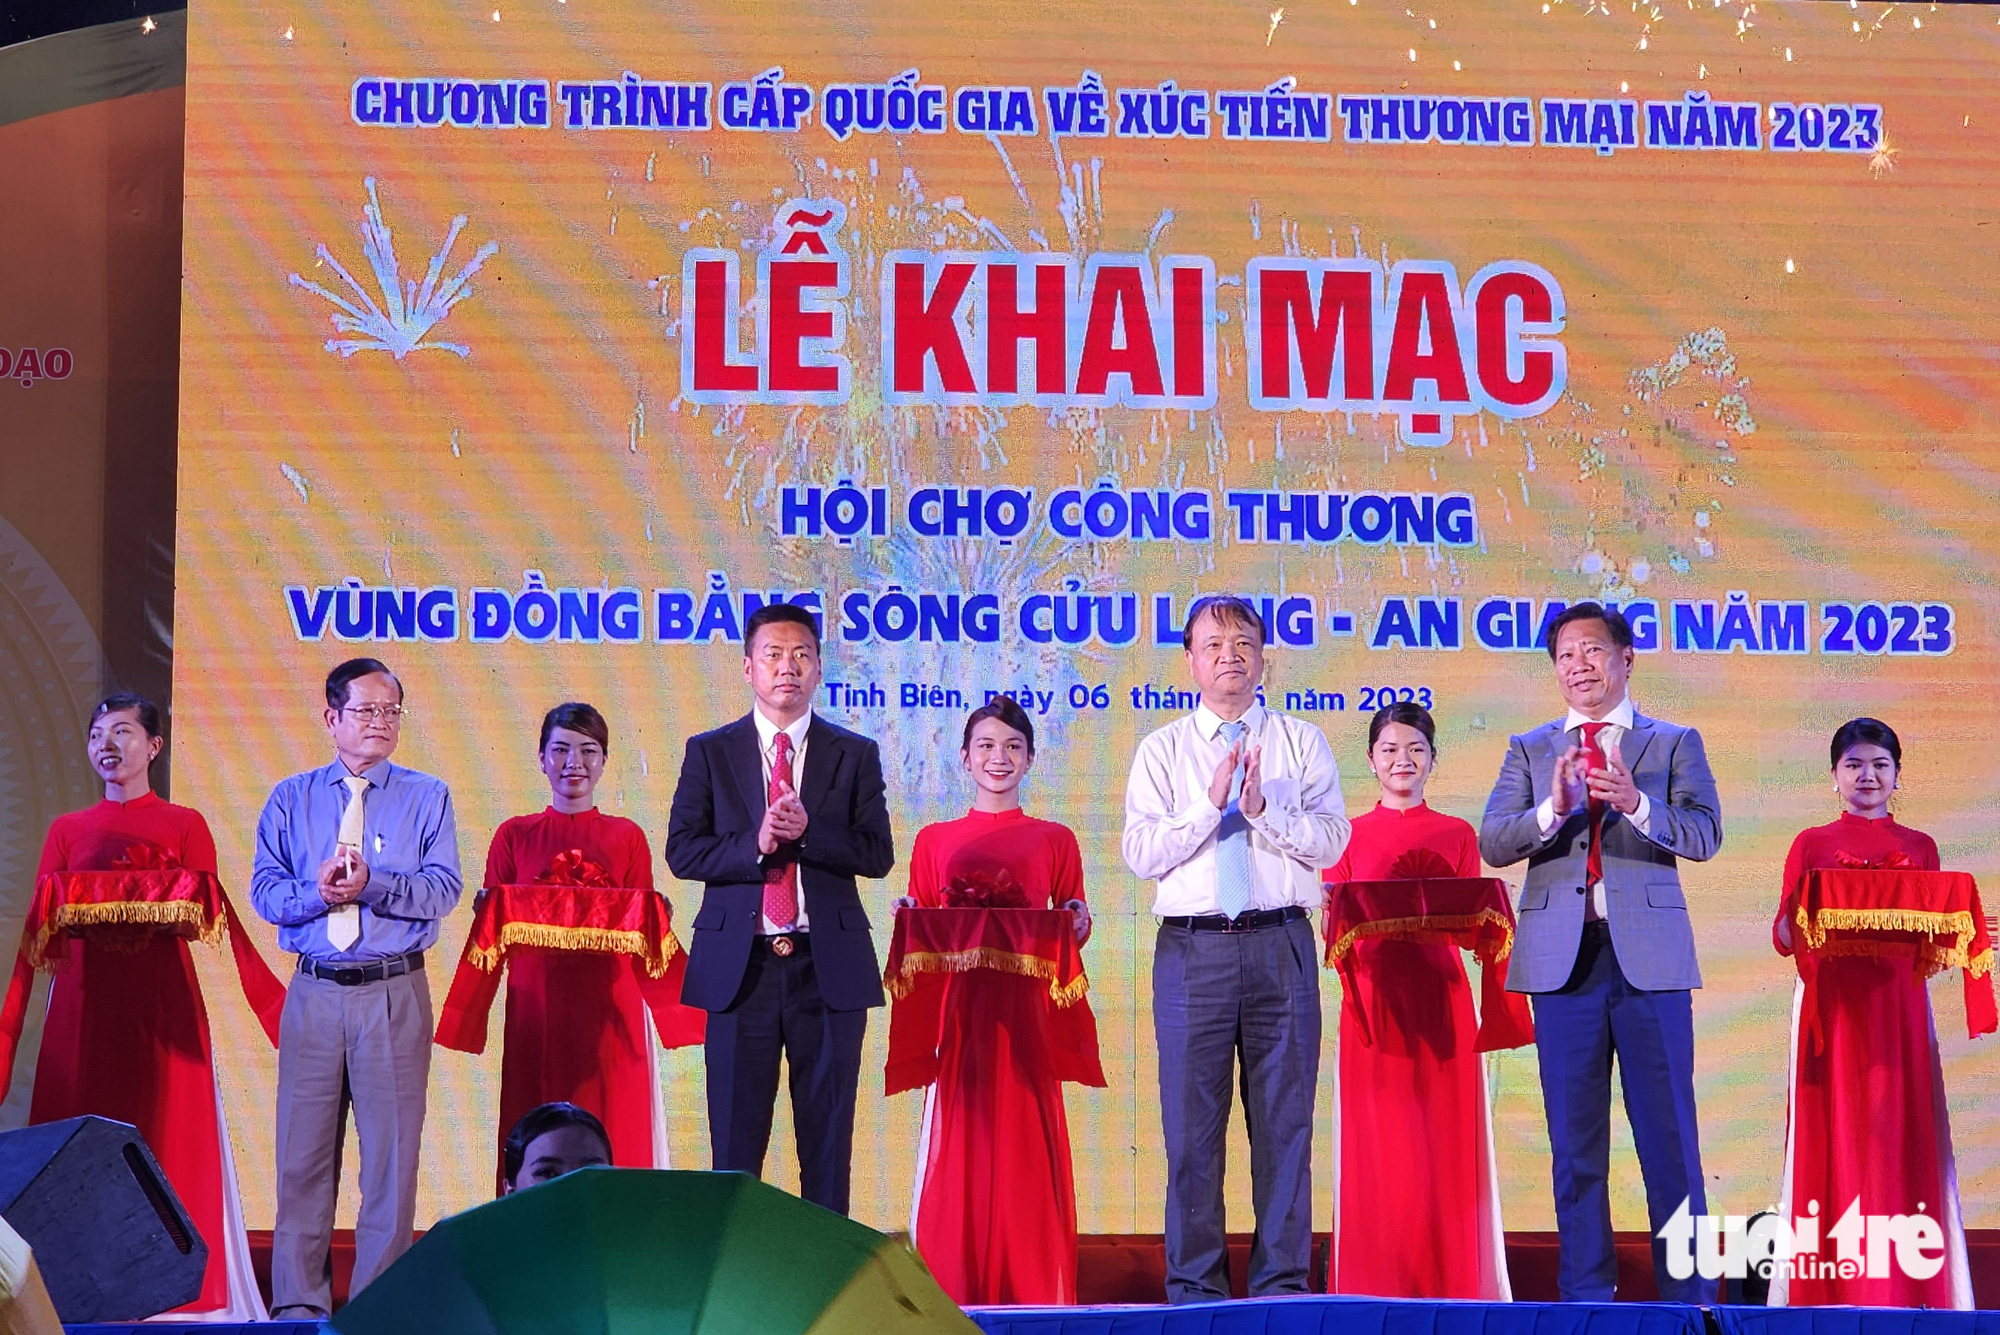 Deputy Minister of Industry and Trade Do Thang Hai (first row, R, 2nd) attends the opening ceremony of the trade fair in An Giang Province, southern Vietnam, June 6, 2023. Photo: Buu Dau / Tuoi Tre